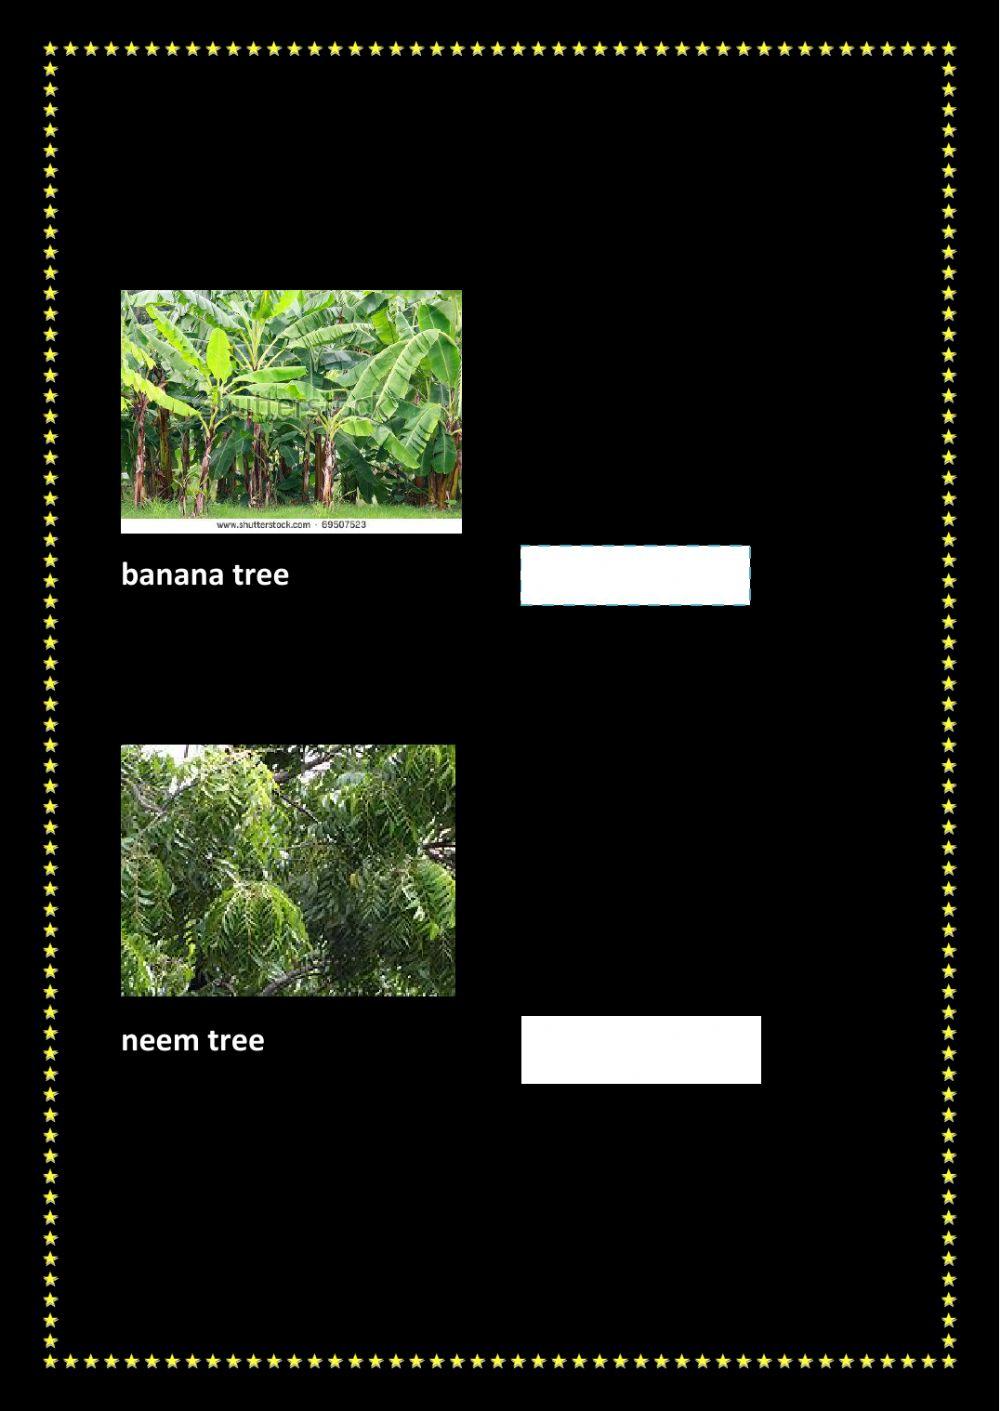 type the names of the trees